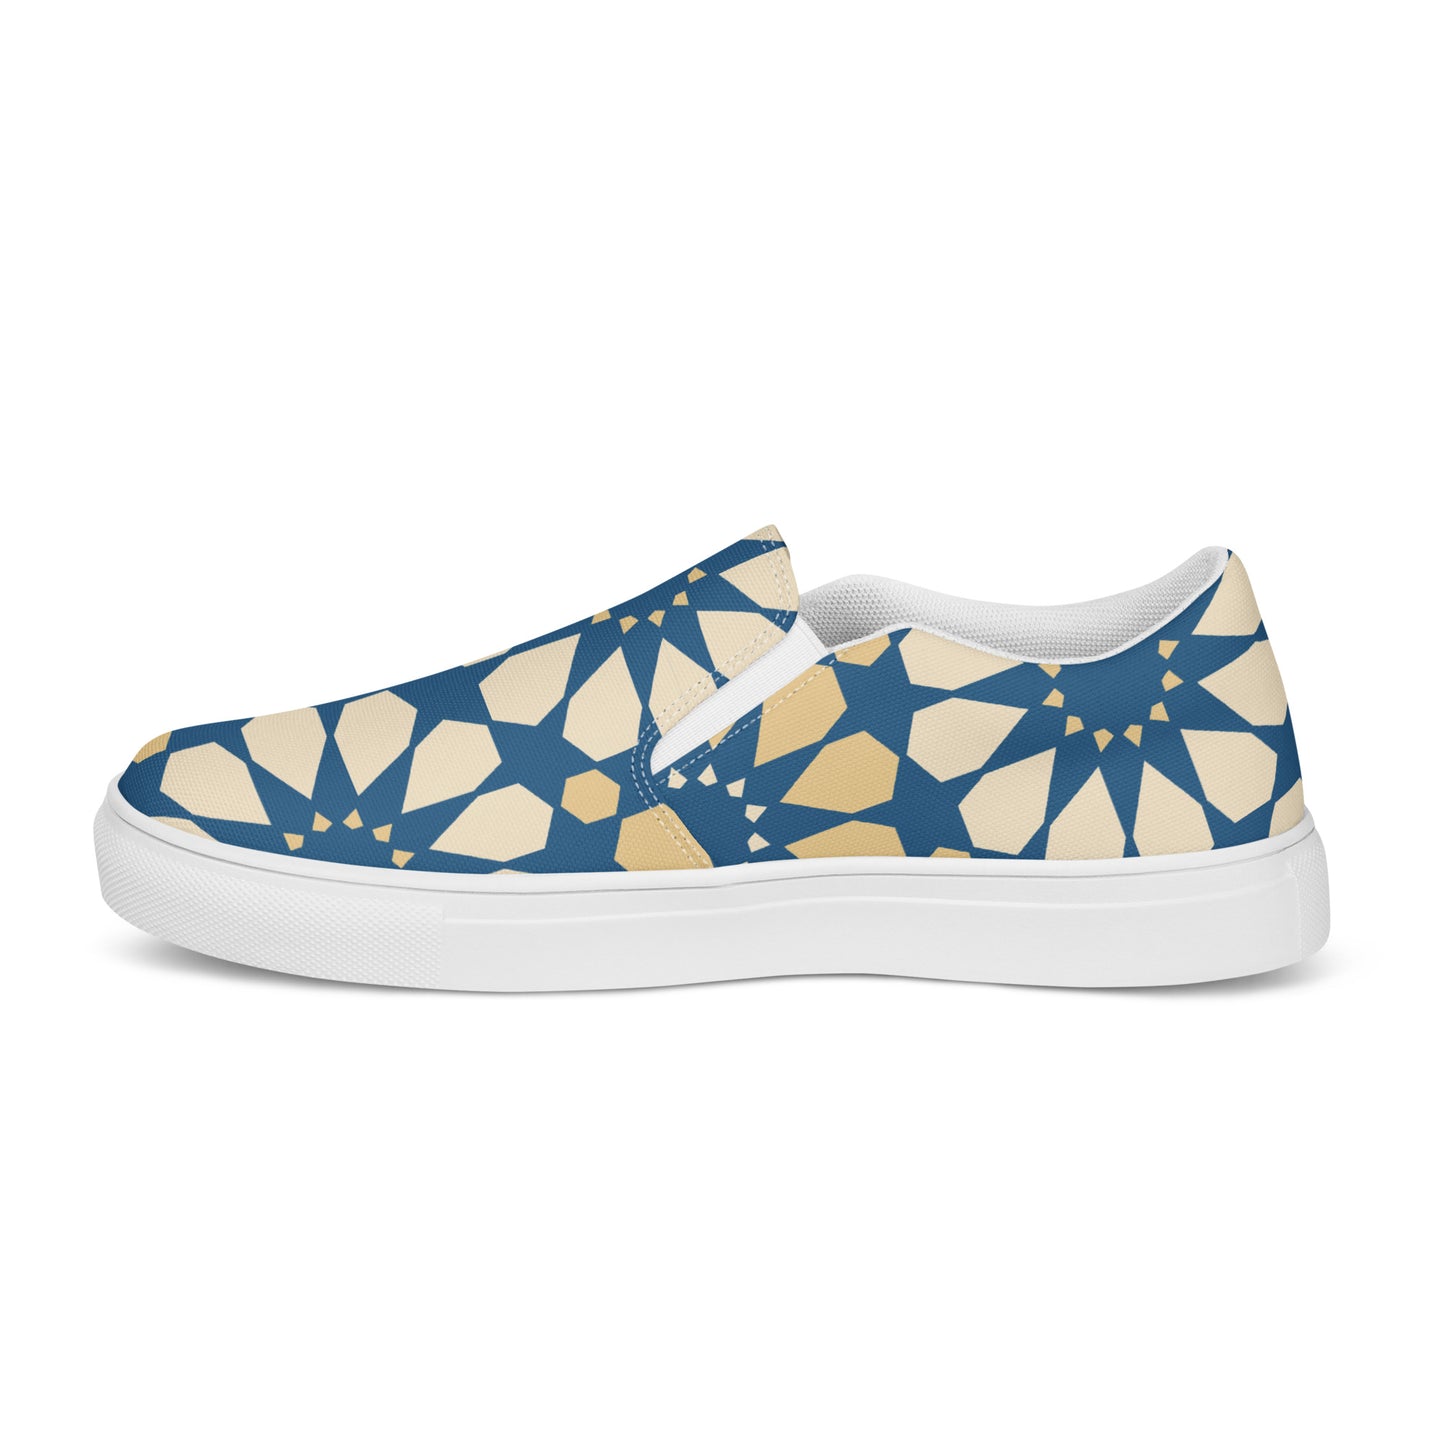 Women’s slip-on canvas shoes, made for comfort and stylist. Part of the sunflower collection